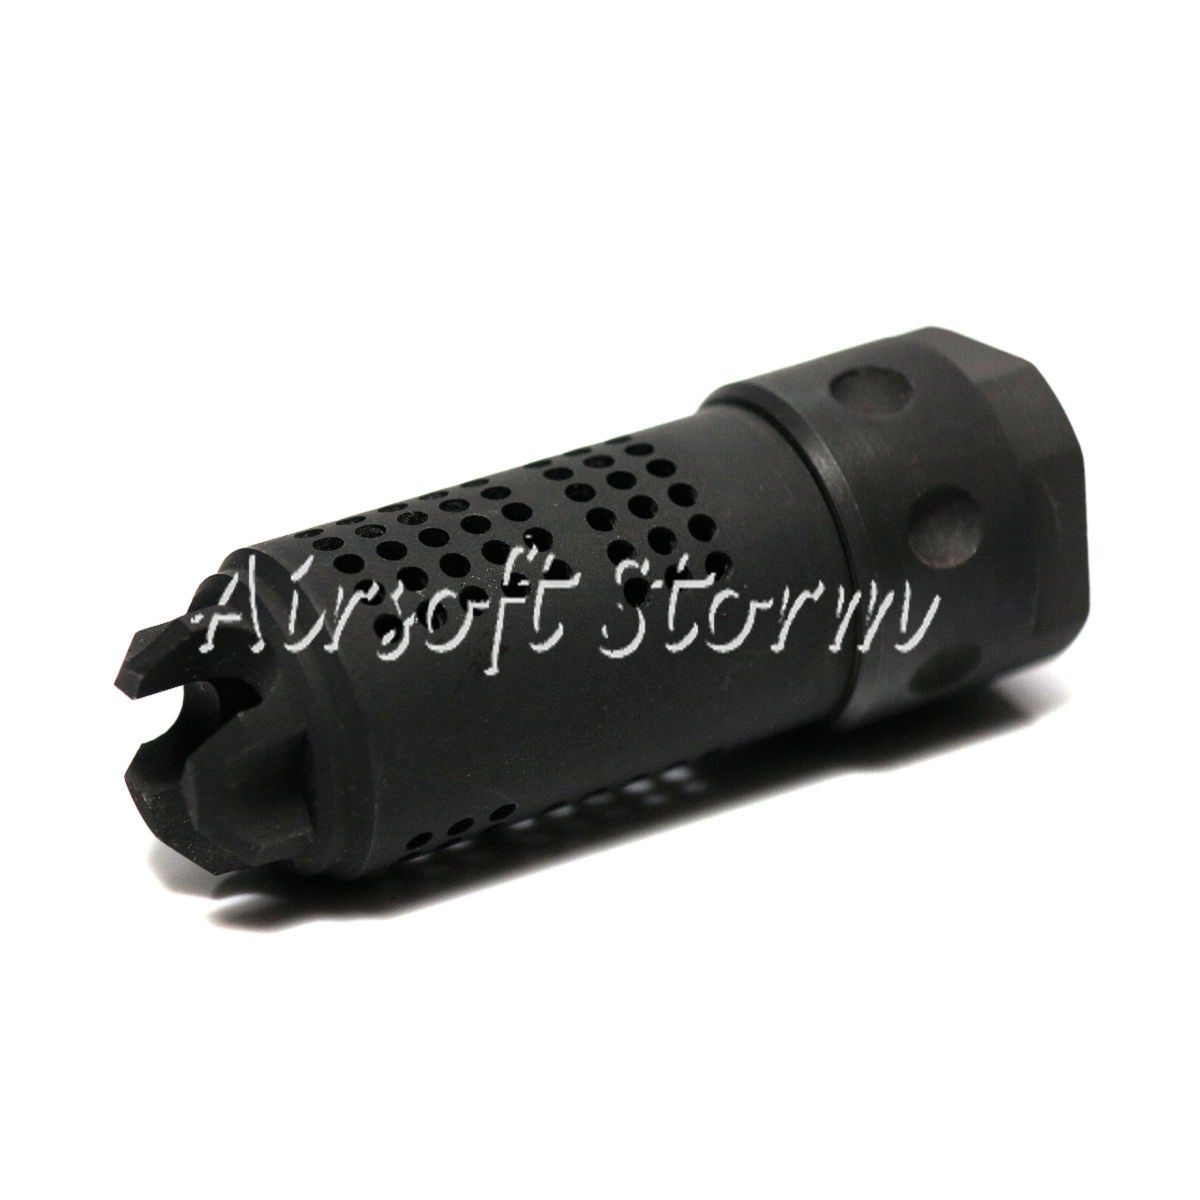 Shooting Gear Army Force 5.56 MAMS Type Steel Flash Hider 14mm CCW Black